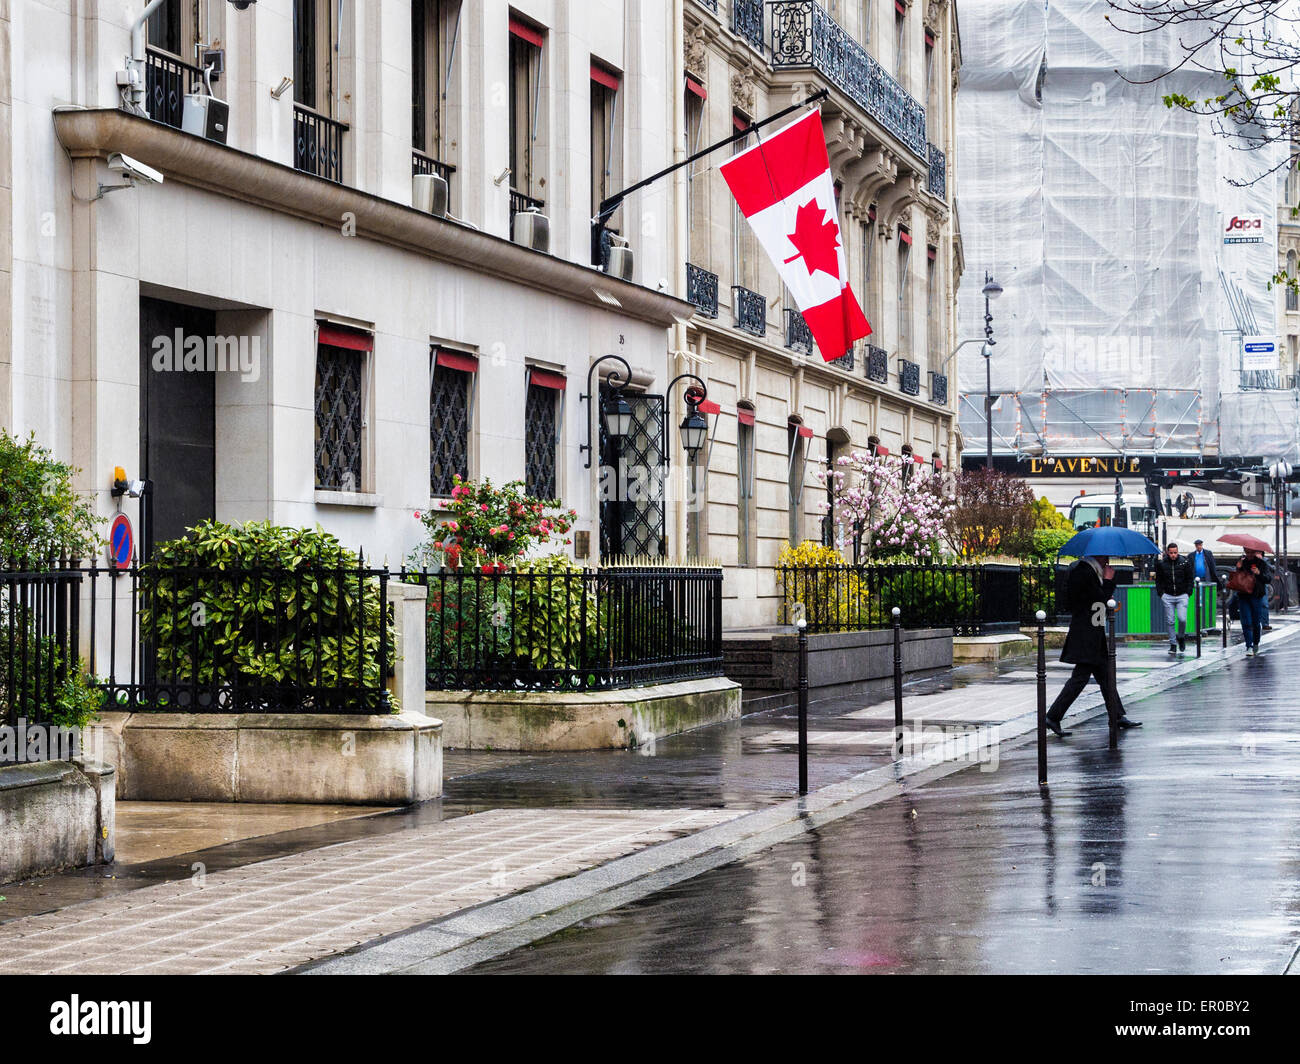 Paris Canadian Embassy building exterior and Maple leaf red and white Canadian flag, Avenue Montaigne Stock Photo